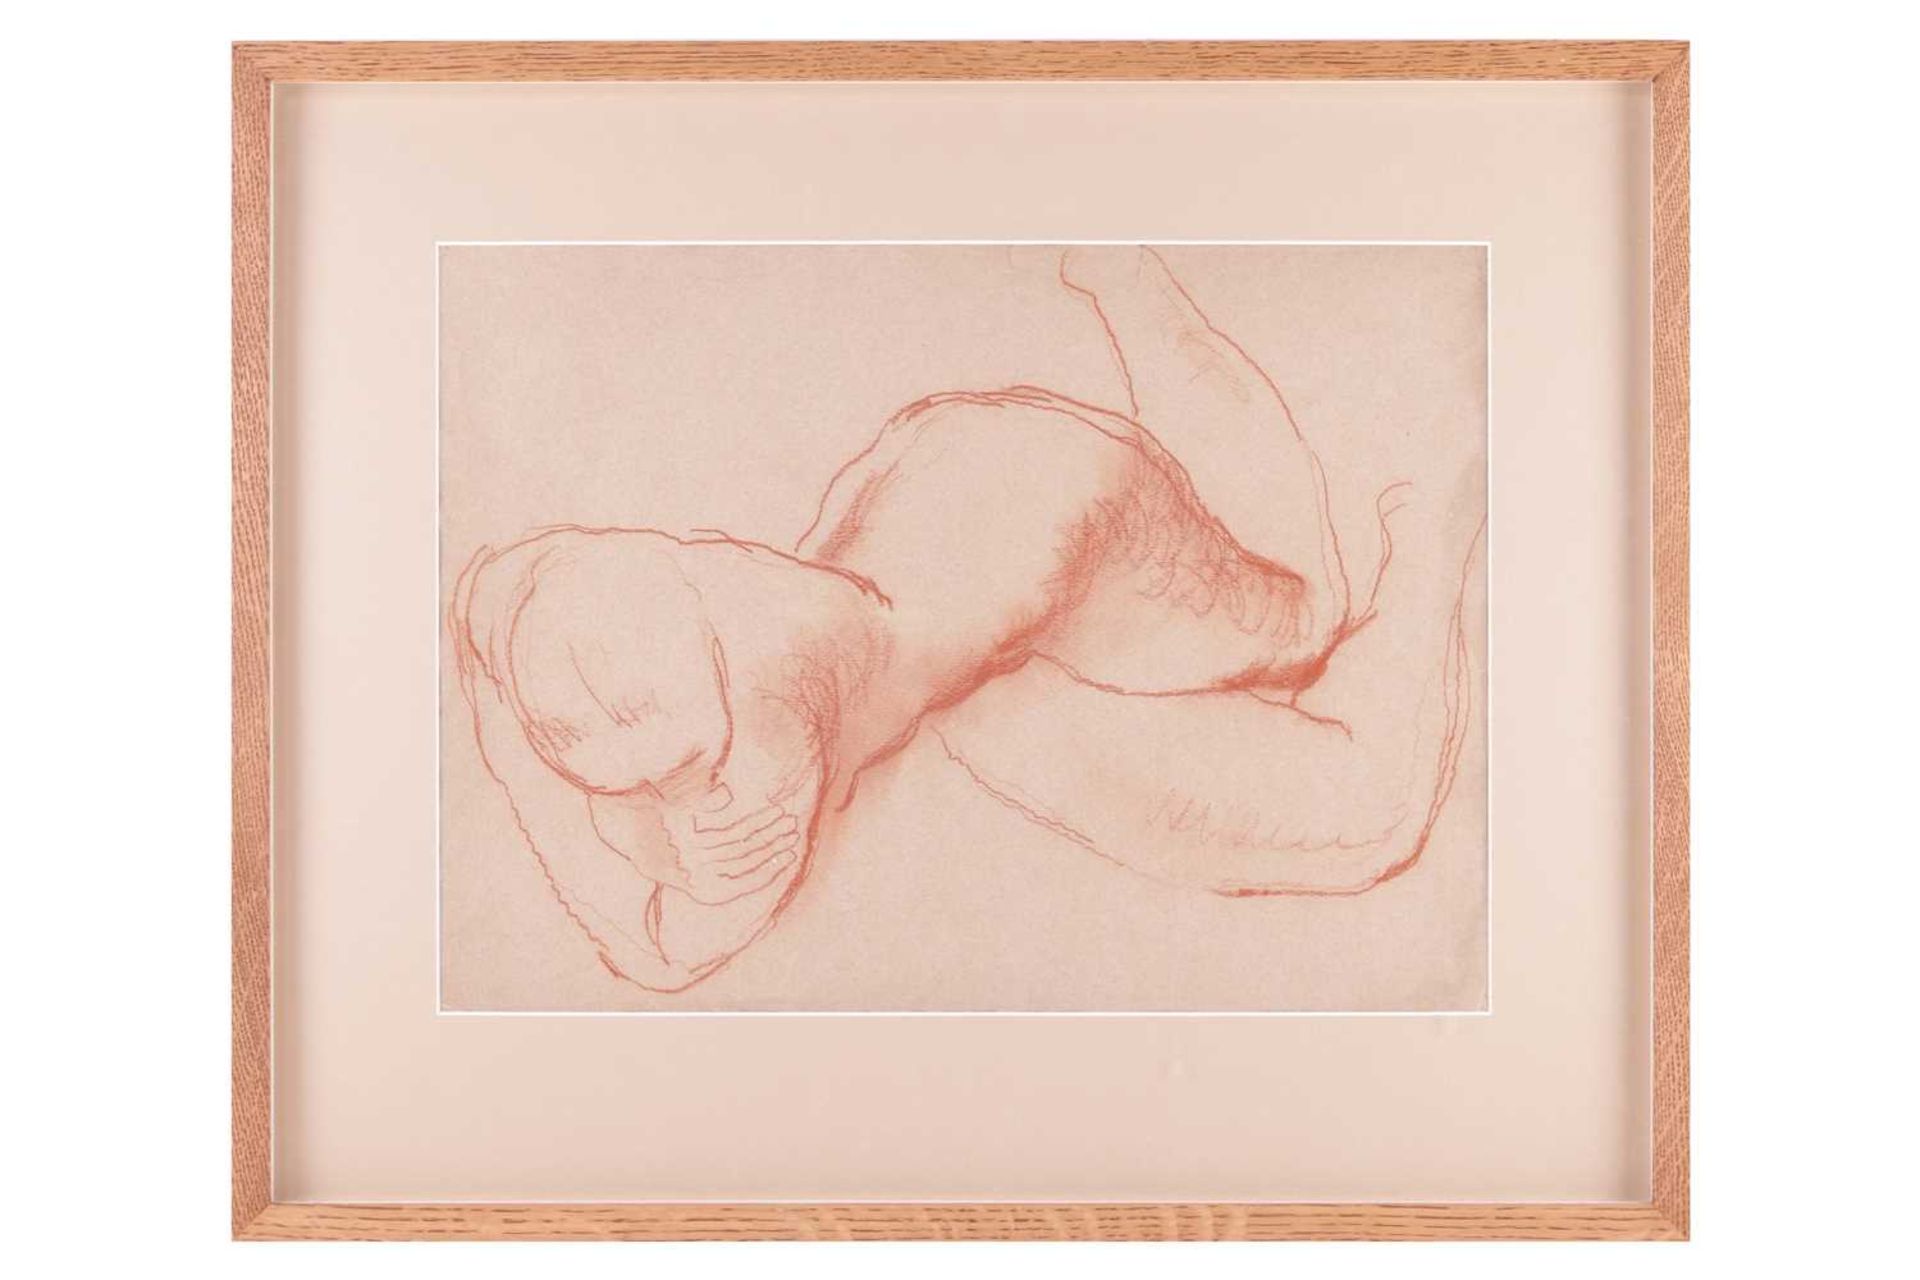 Frank Dobson (1886 - 1963), Recumbent Nude Facing Down, unsigned, red chalk and pastel, 28.5 x 39 cm